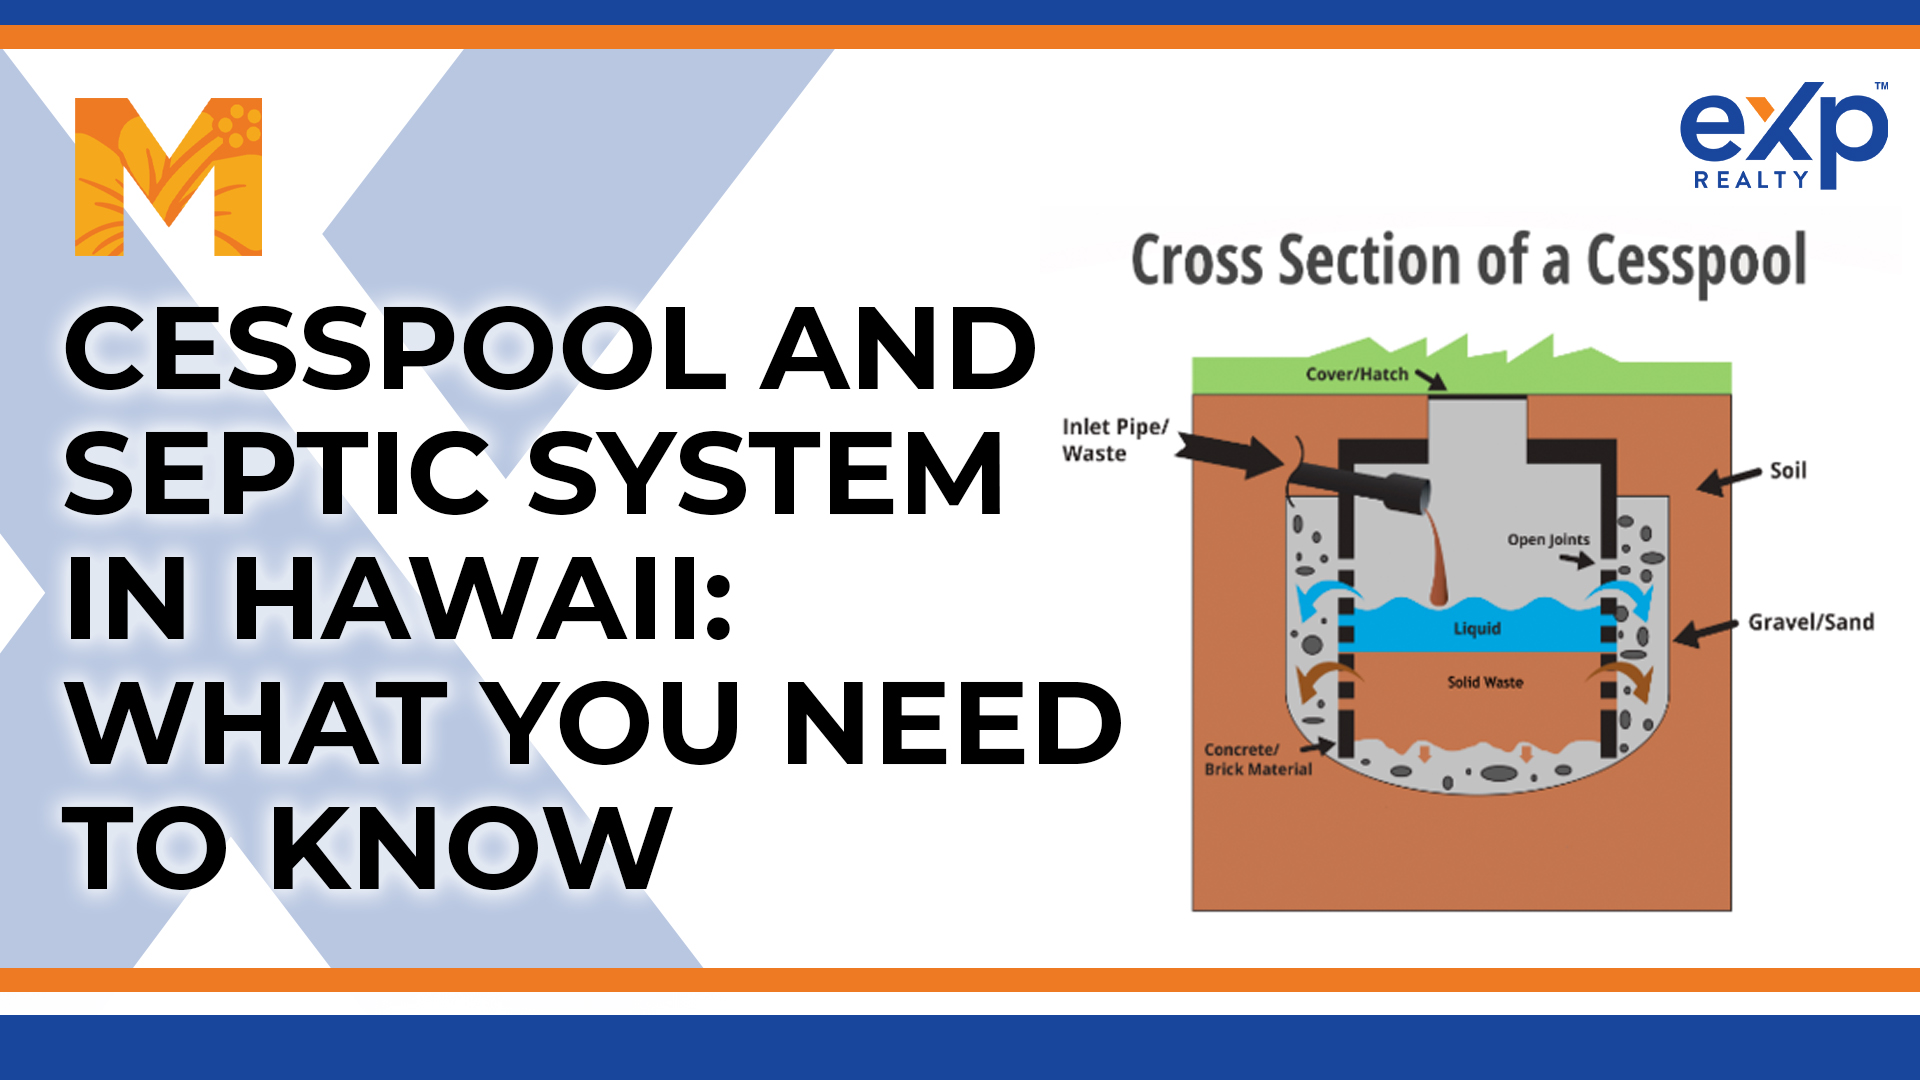 Cesspool and Septic System in Hawaii: What You Need to Know